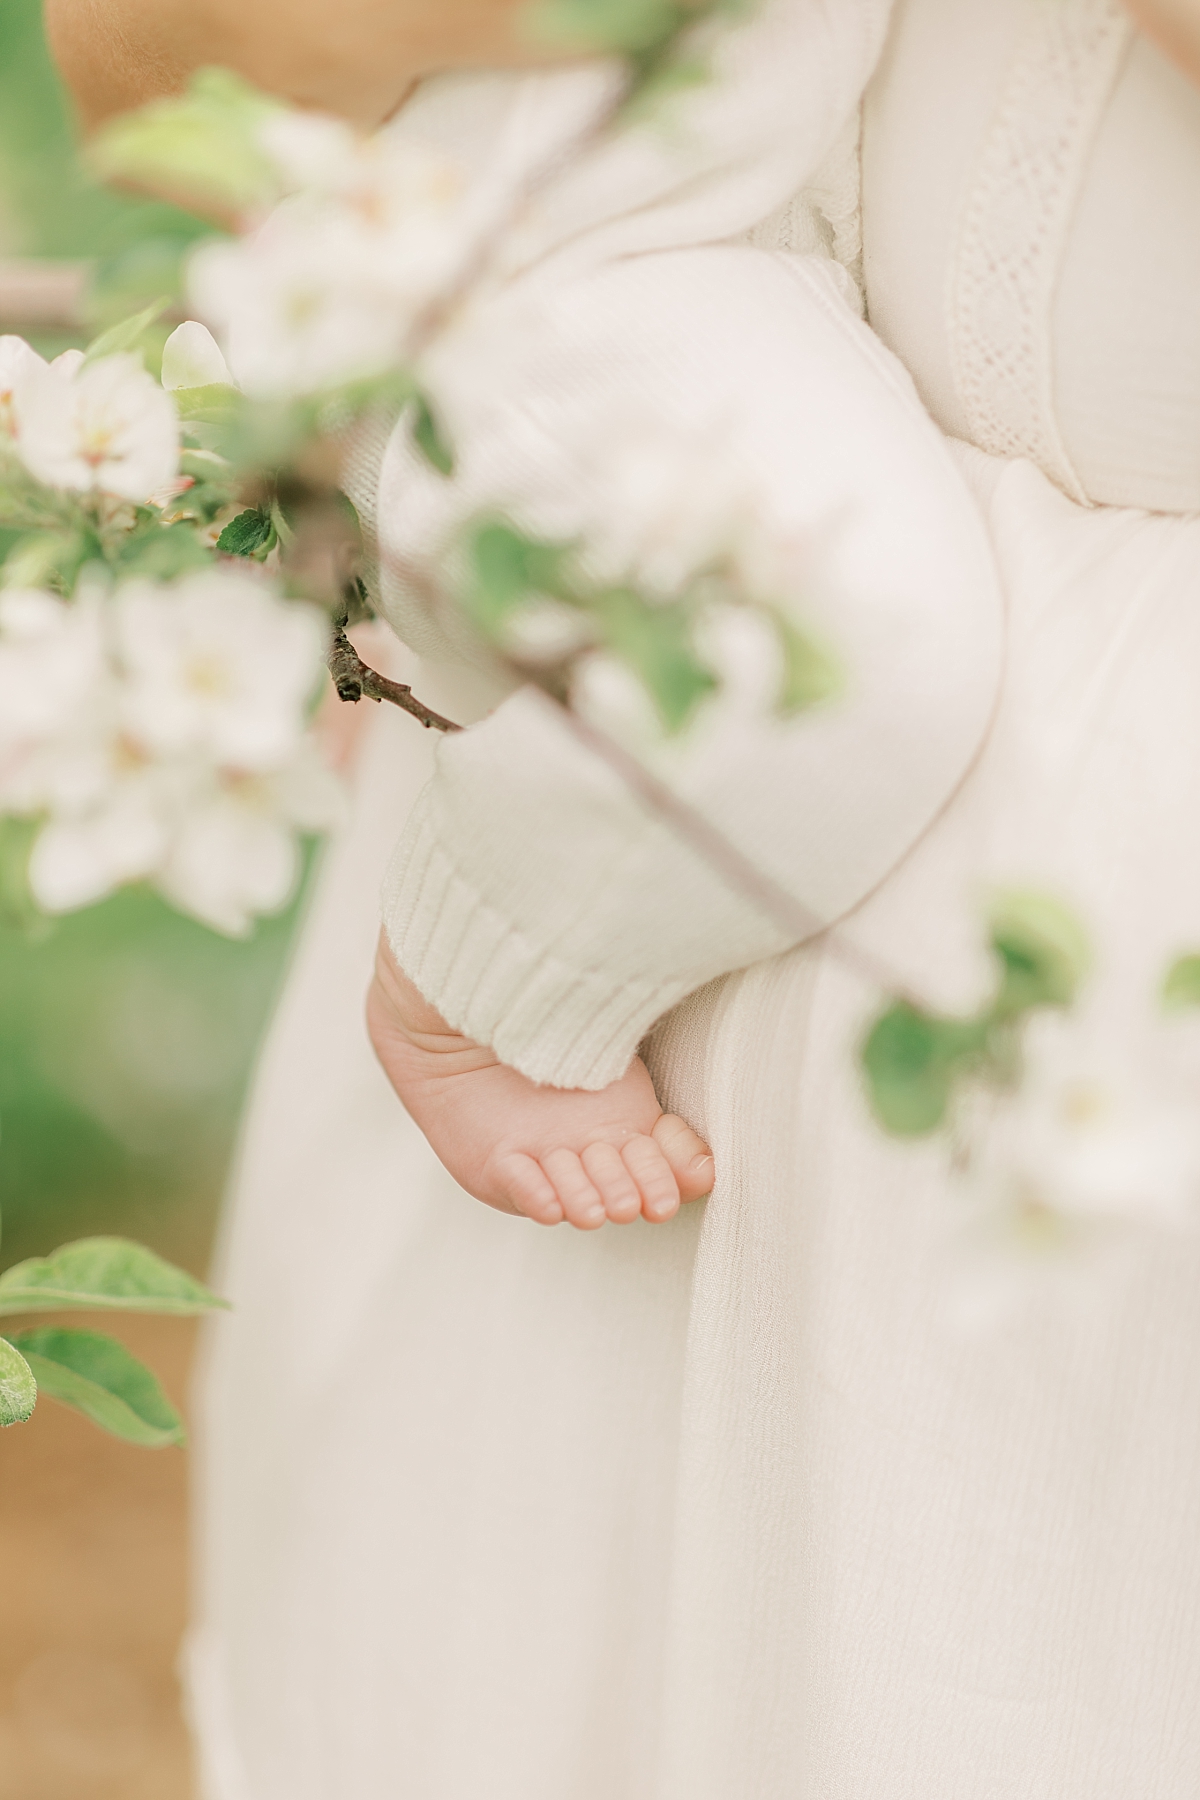 orchard newborn session baby toes